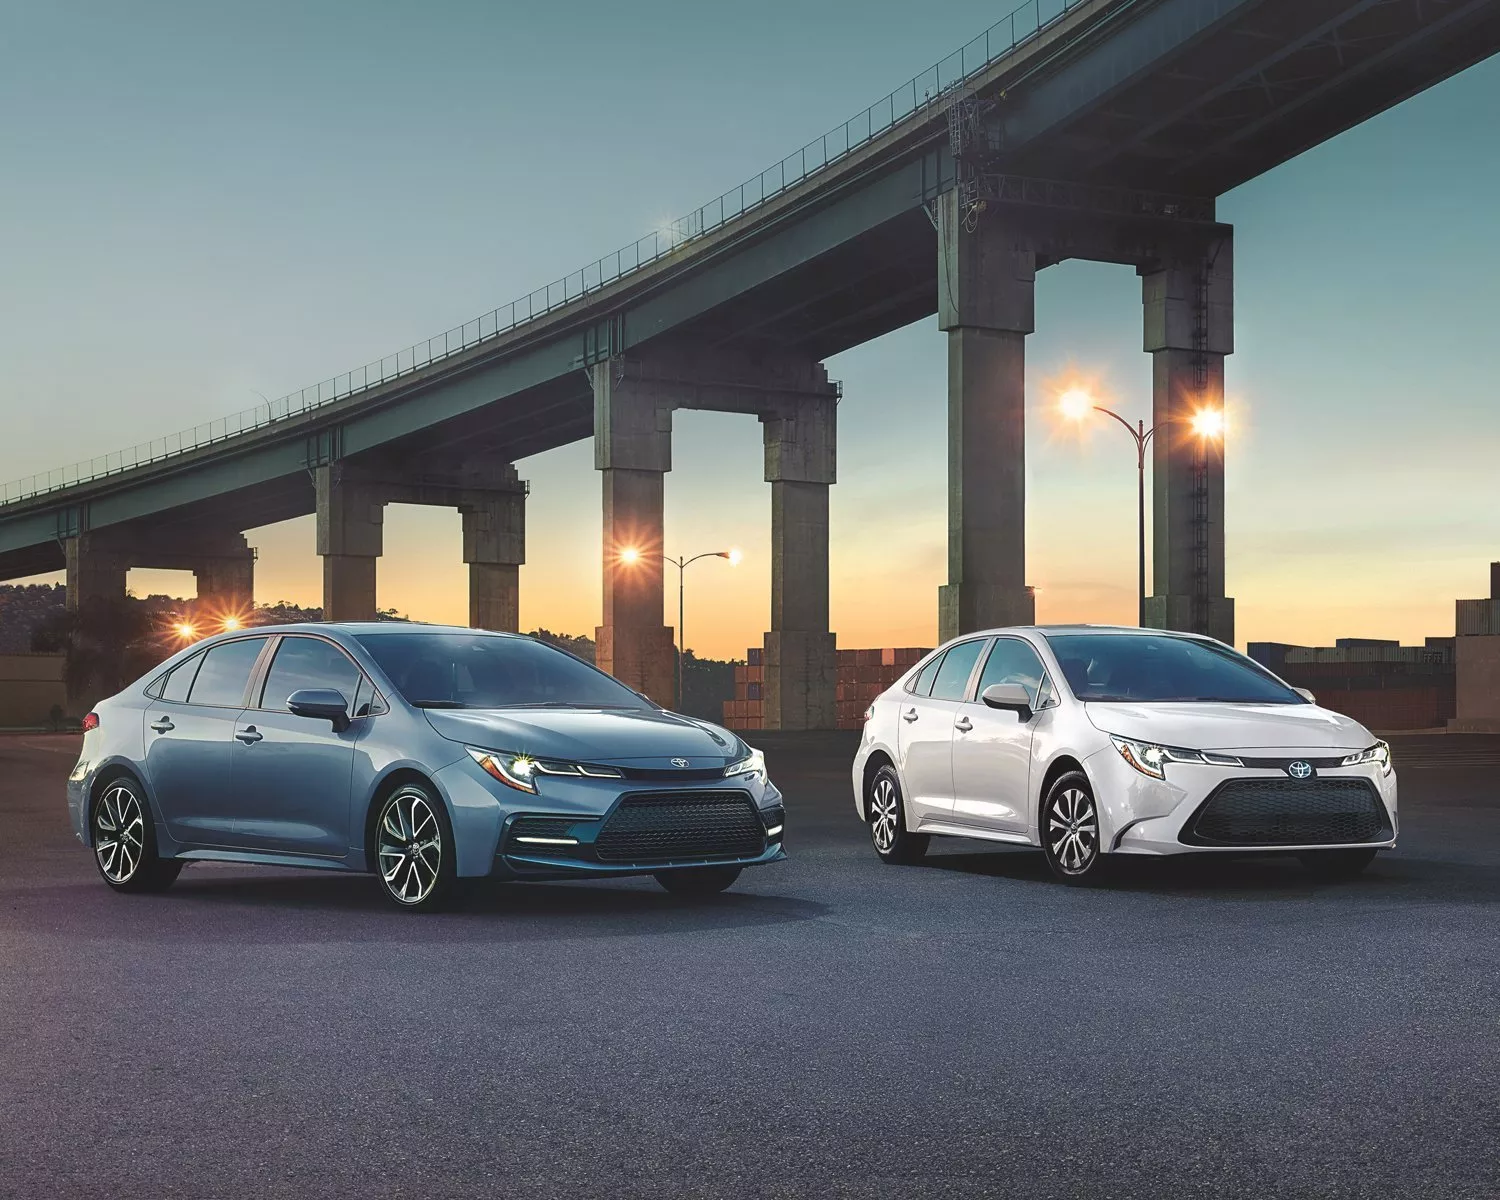 A blue/grey and white Toyota Corolla parked beside each other under a bridge. Sun is going down